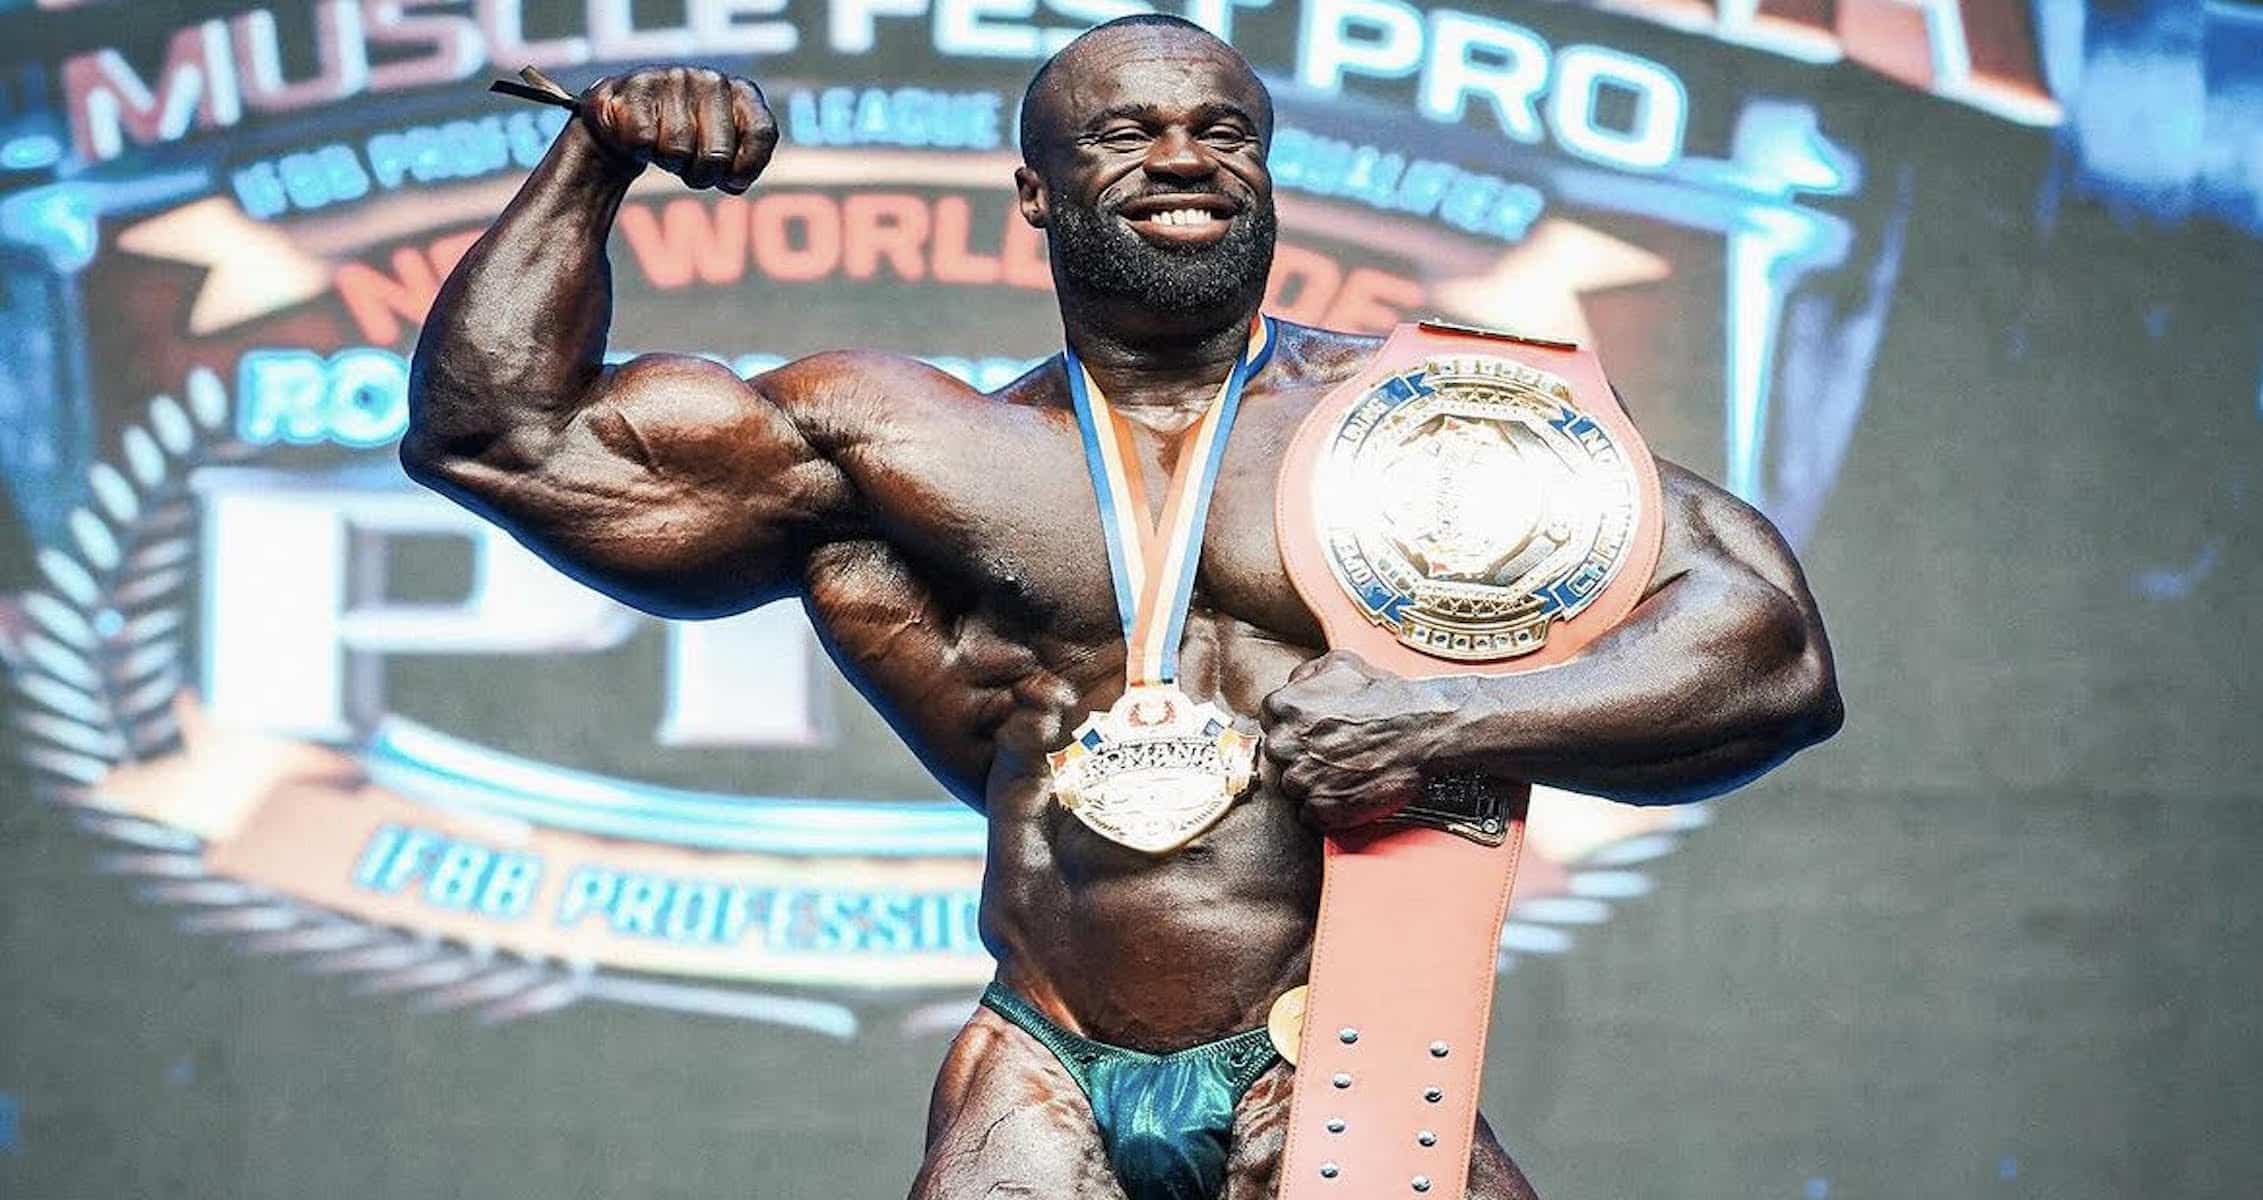 Samson Dauda poses with belt after his victory during the Romania Muscle Fest Pro on Sunday.